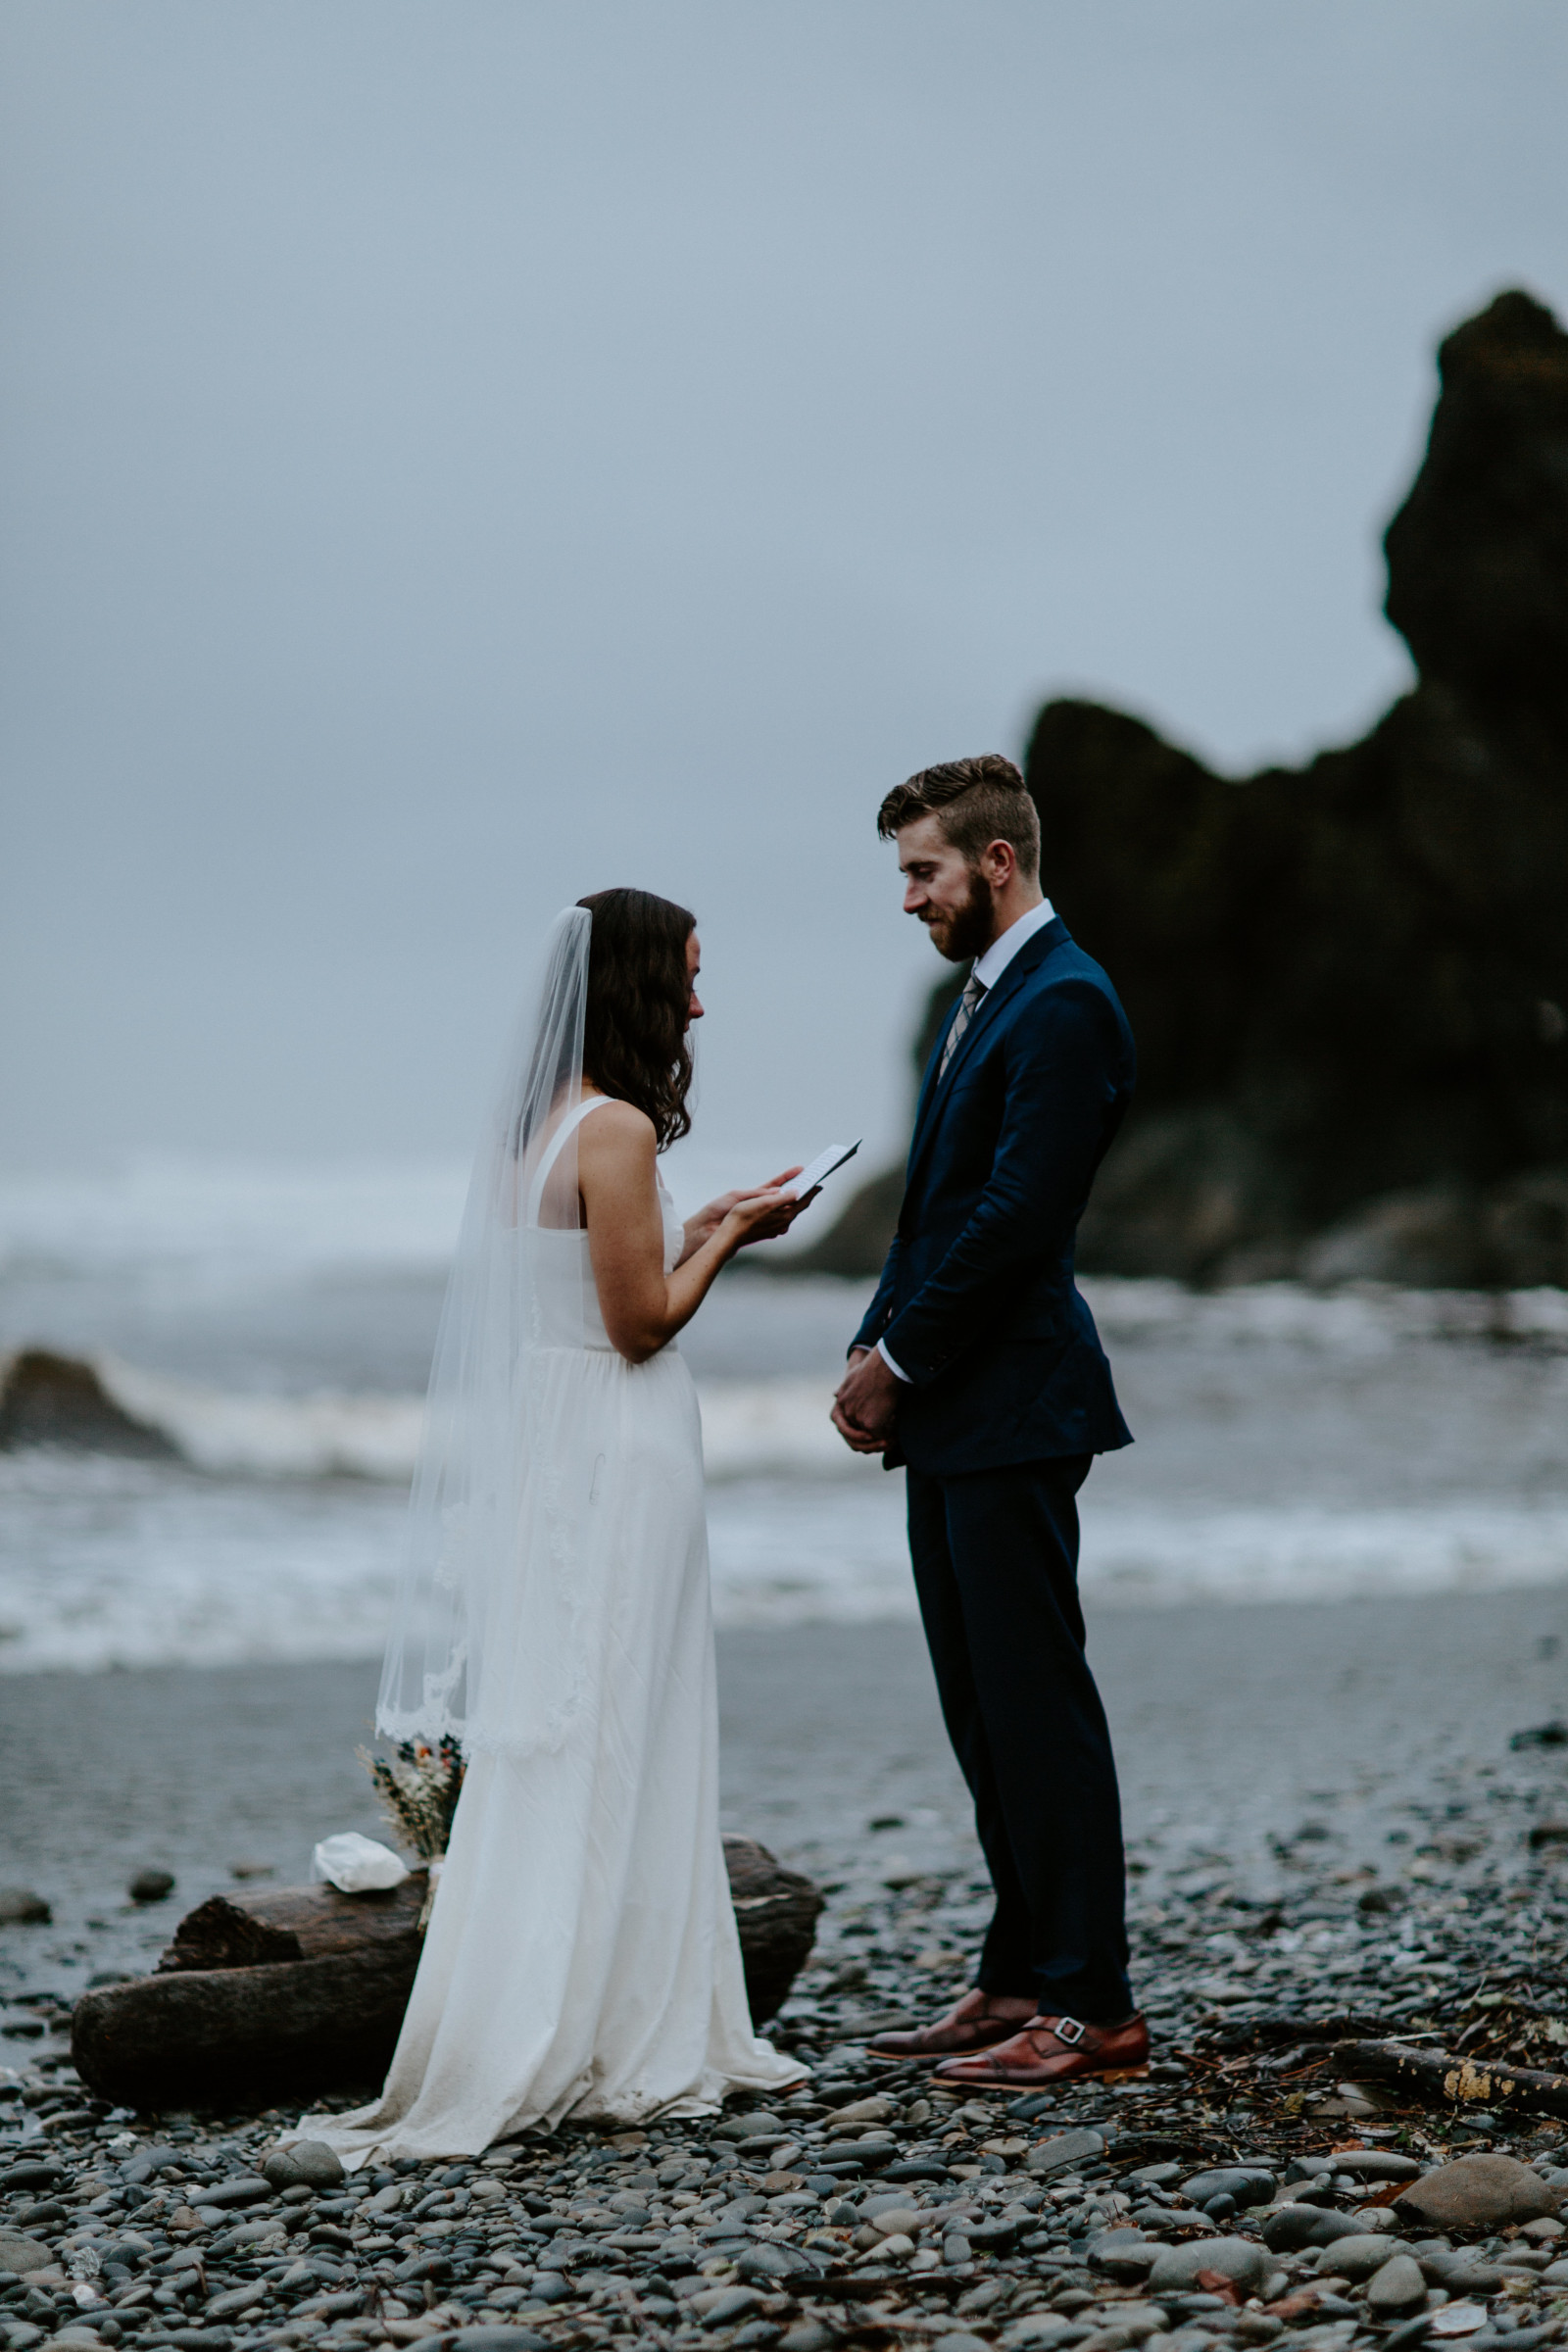 Corey and Mollie elope. Elopement photography in the Olympic National Park by Sienna Plus Josh.